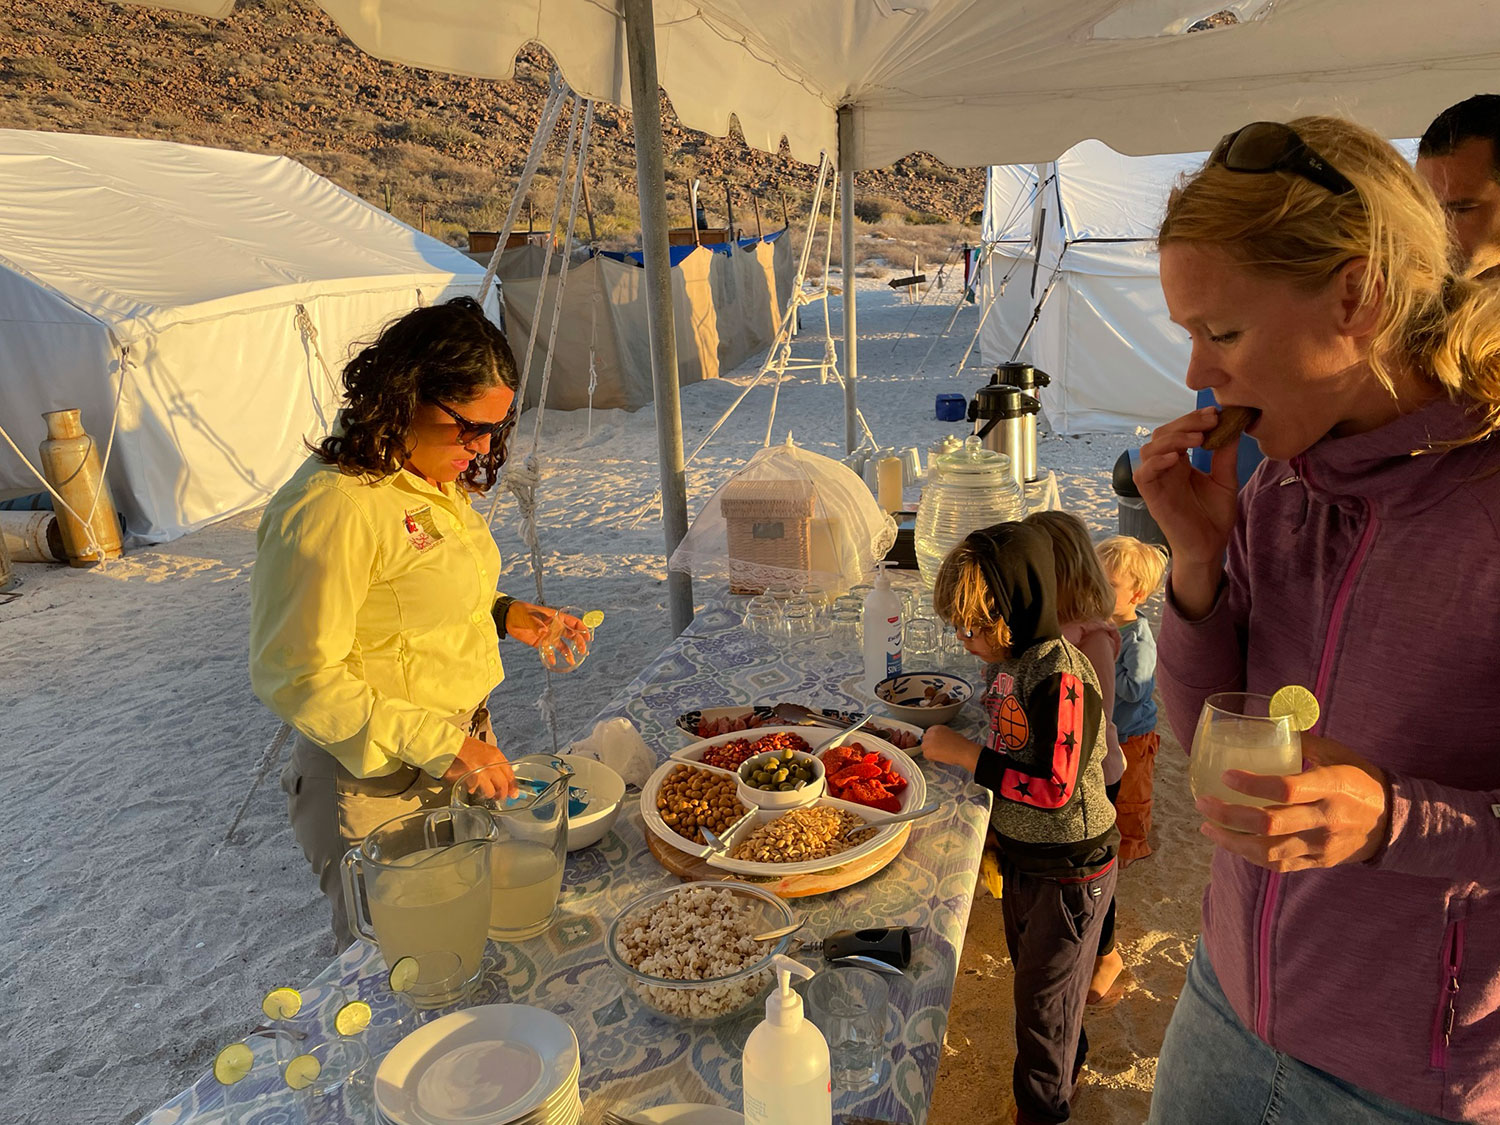 A family stands by a food table while camping on a beach.